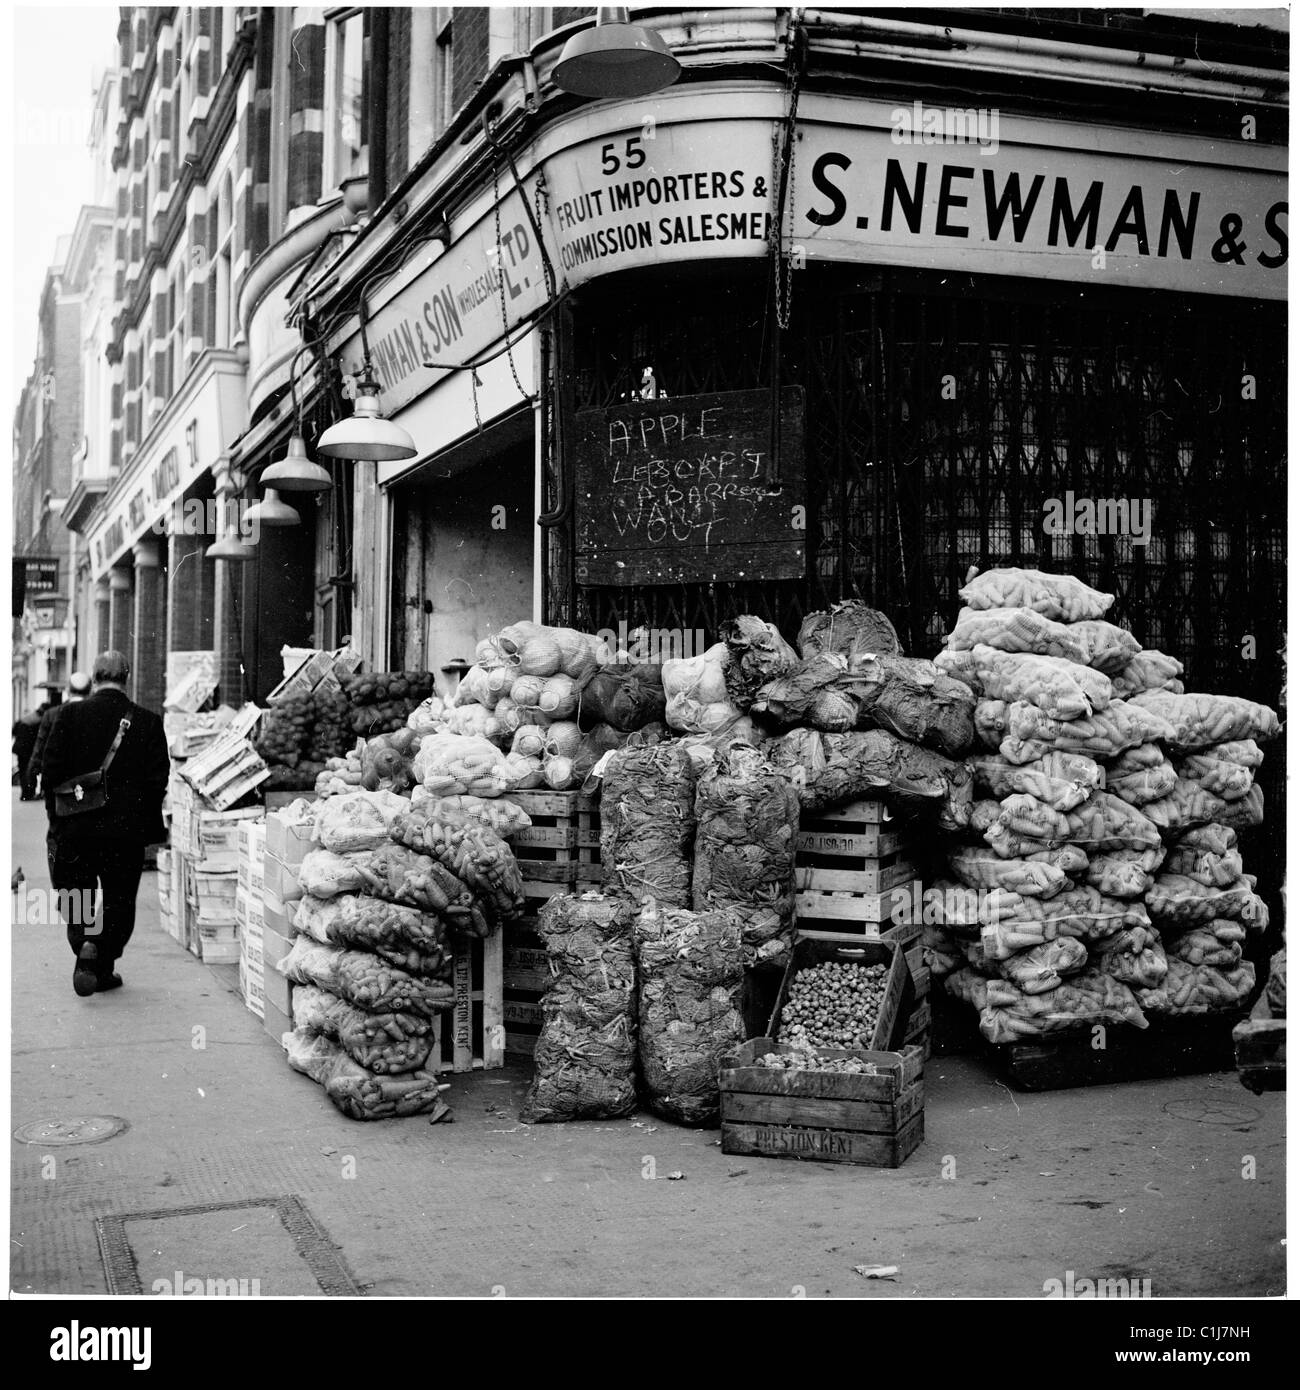 1950s, sacks and crates of fruit and vegetables on the pavement outside fruit importers and wholesalers, S. Newman & Sons, London, England. Stock Photo